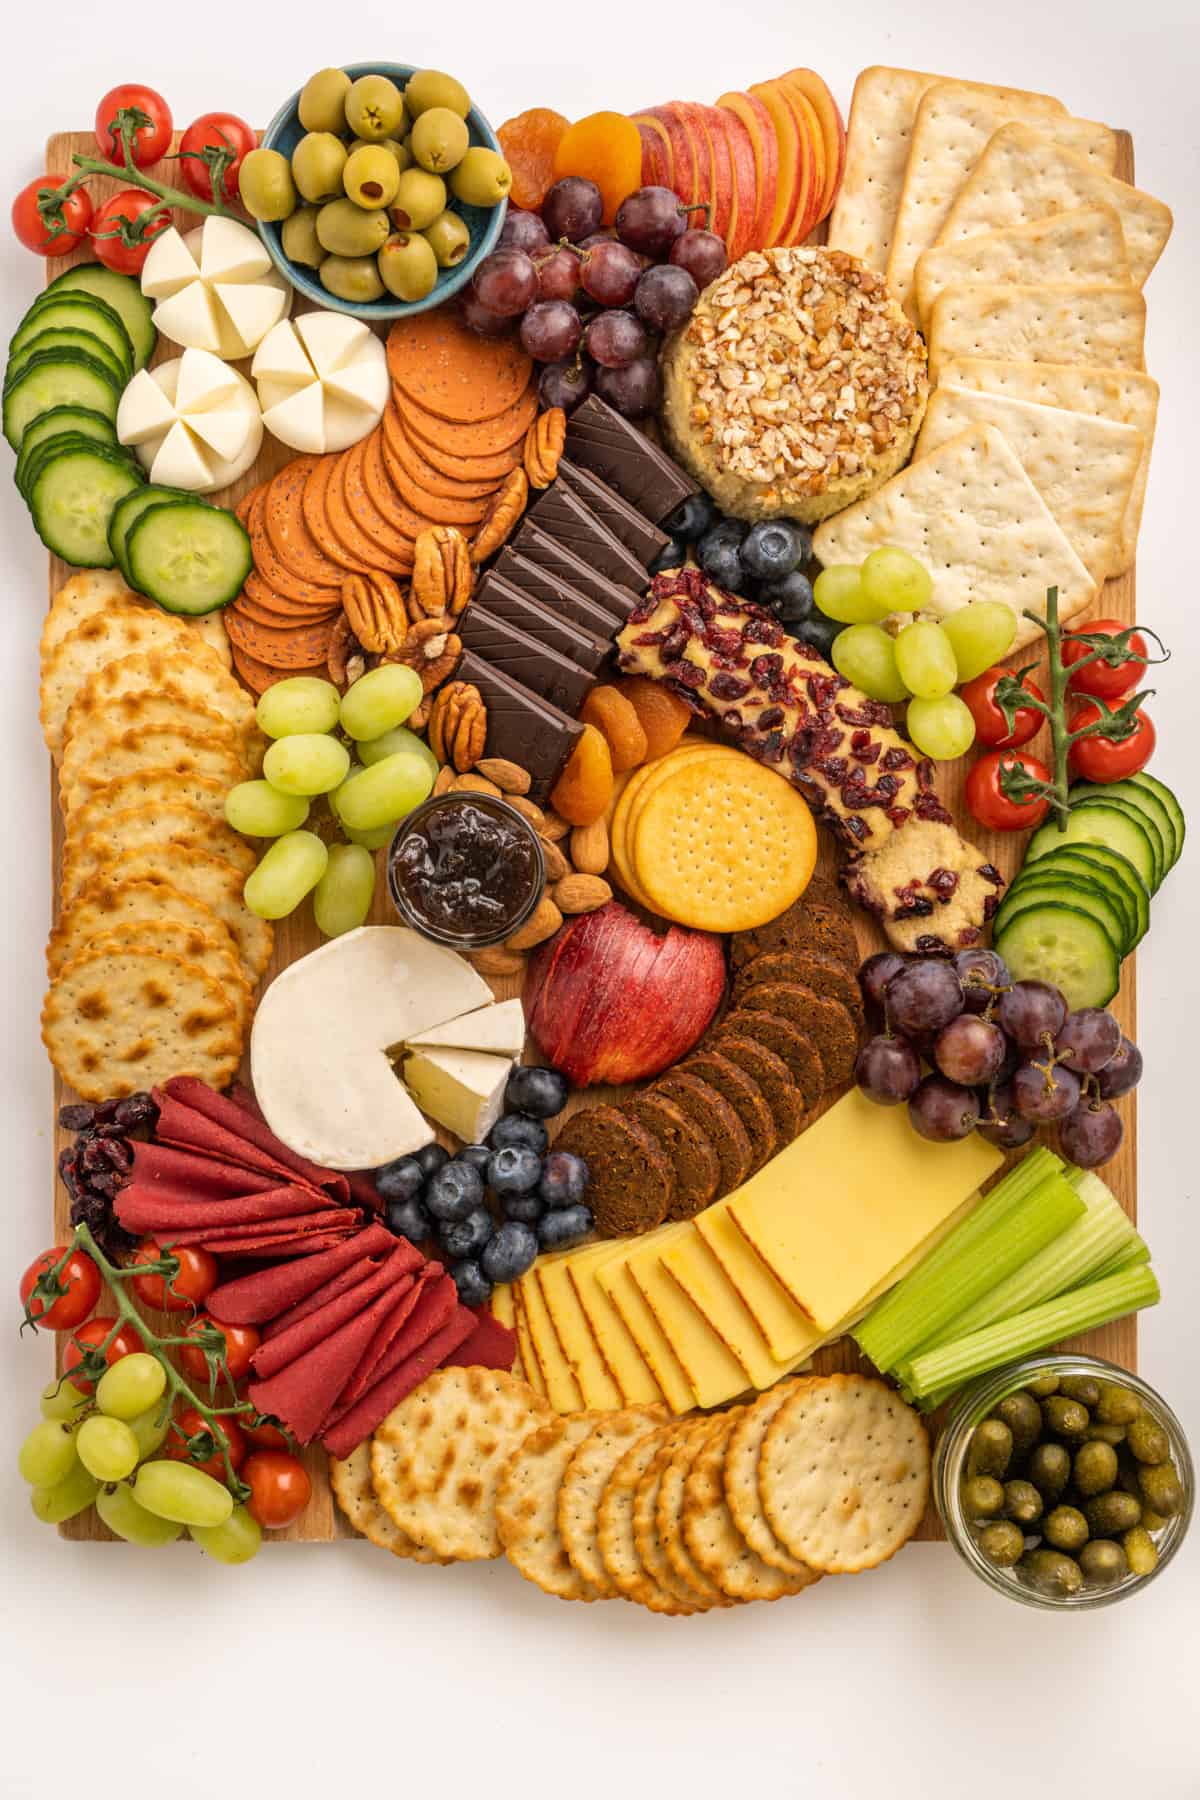 The full charcuterie board consisting of various types of crackers, vegan cheeses, ready-to-eat vegan deli slices, fresh fruit and vegetables, olives, pickles and chutney and topped off with choocolate, nuts and dried fruit.